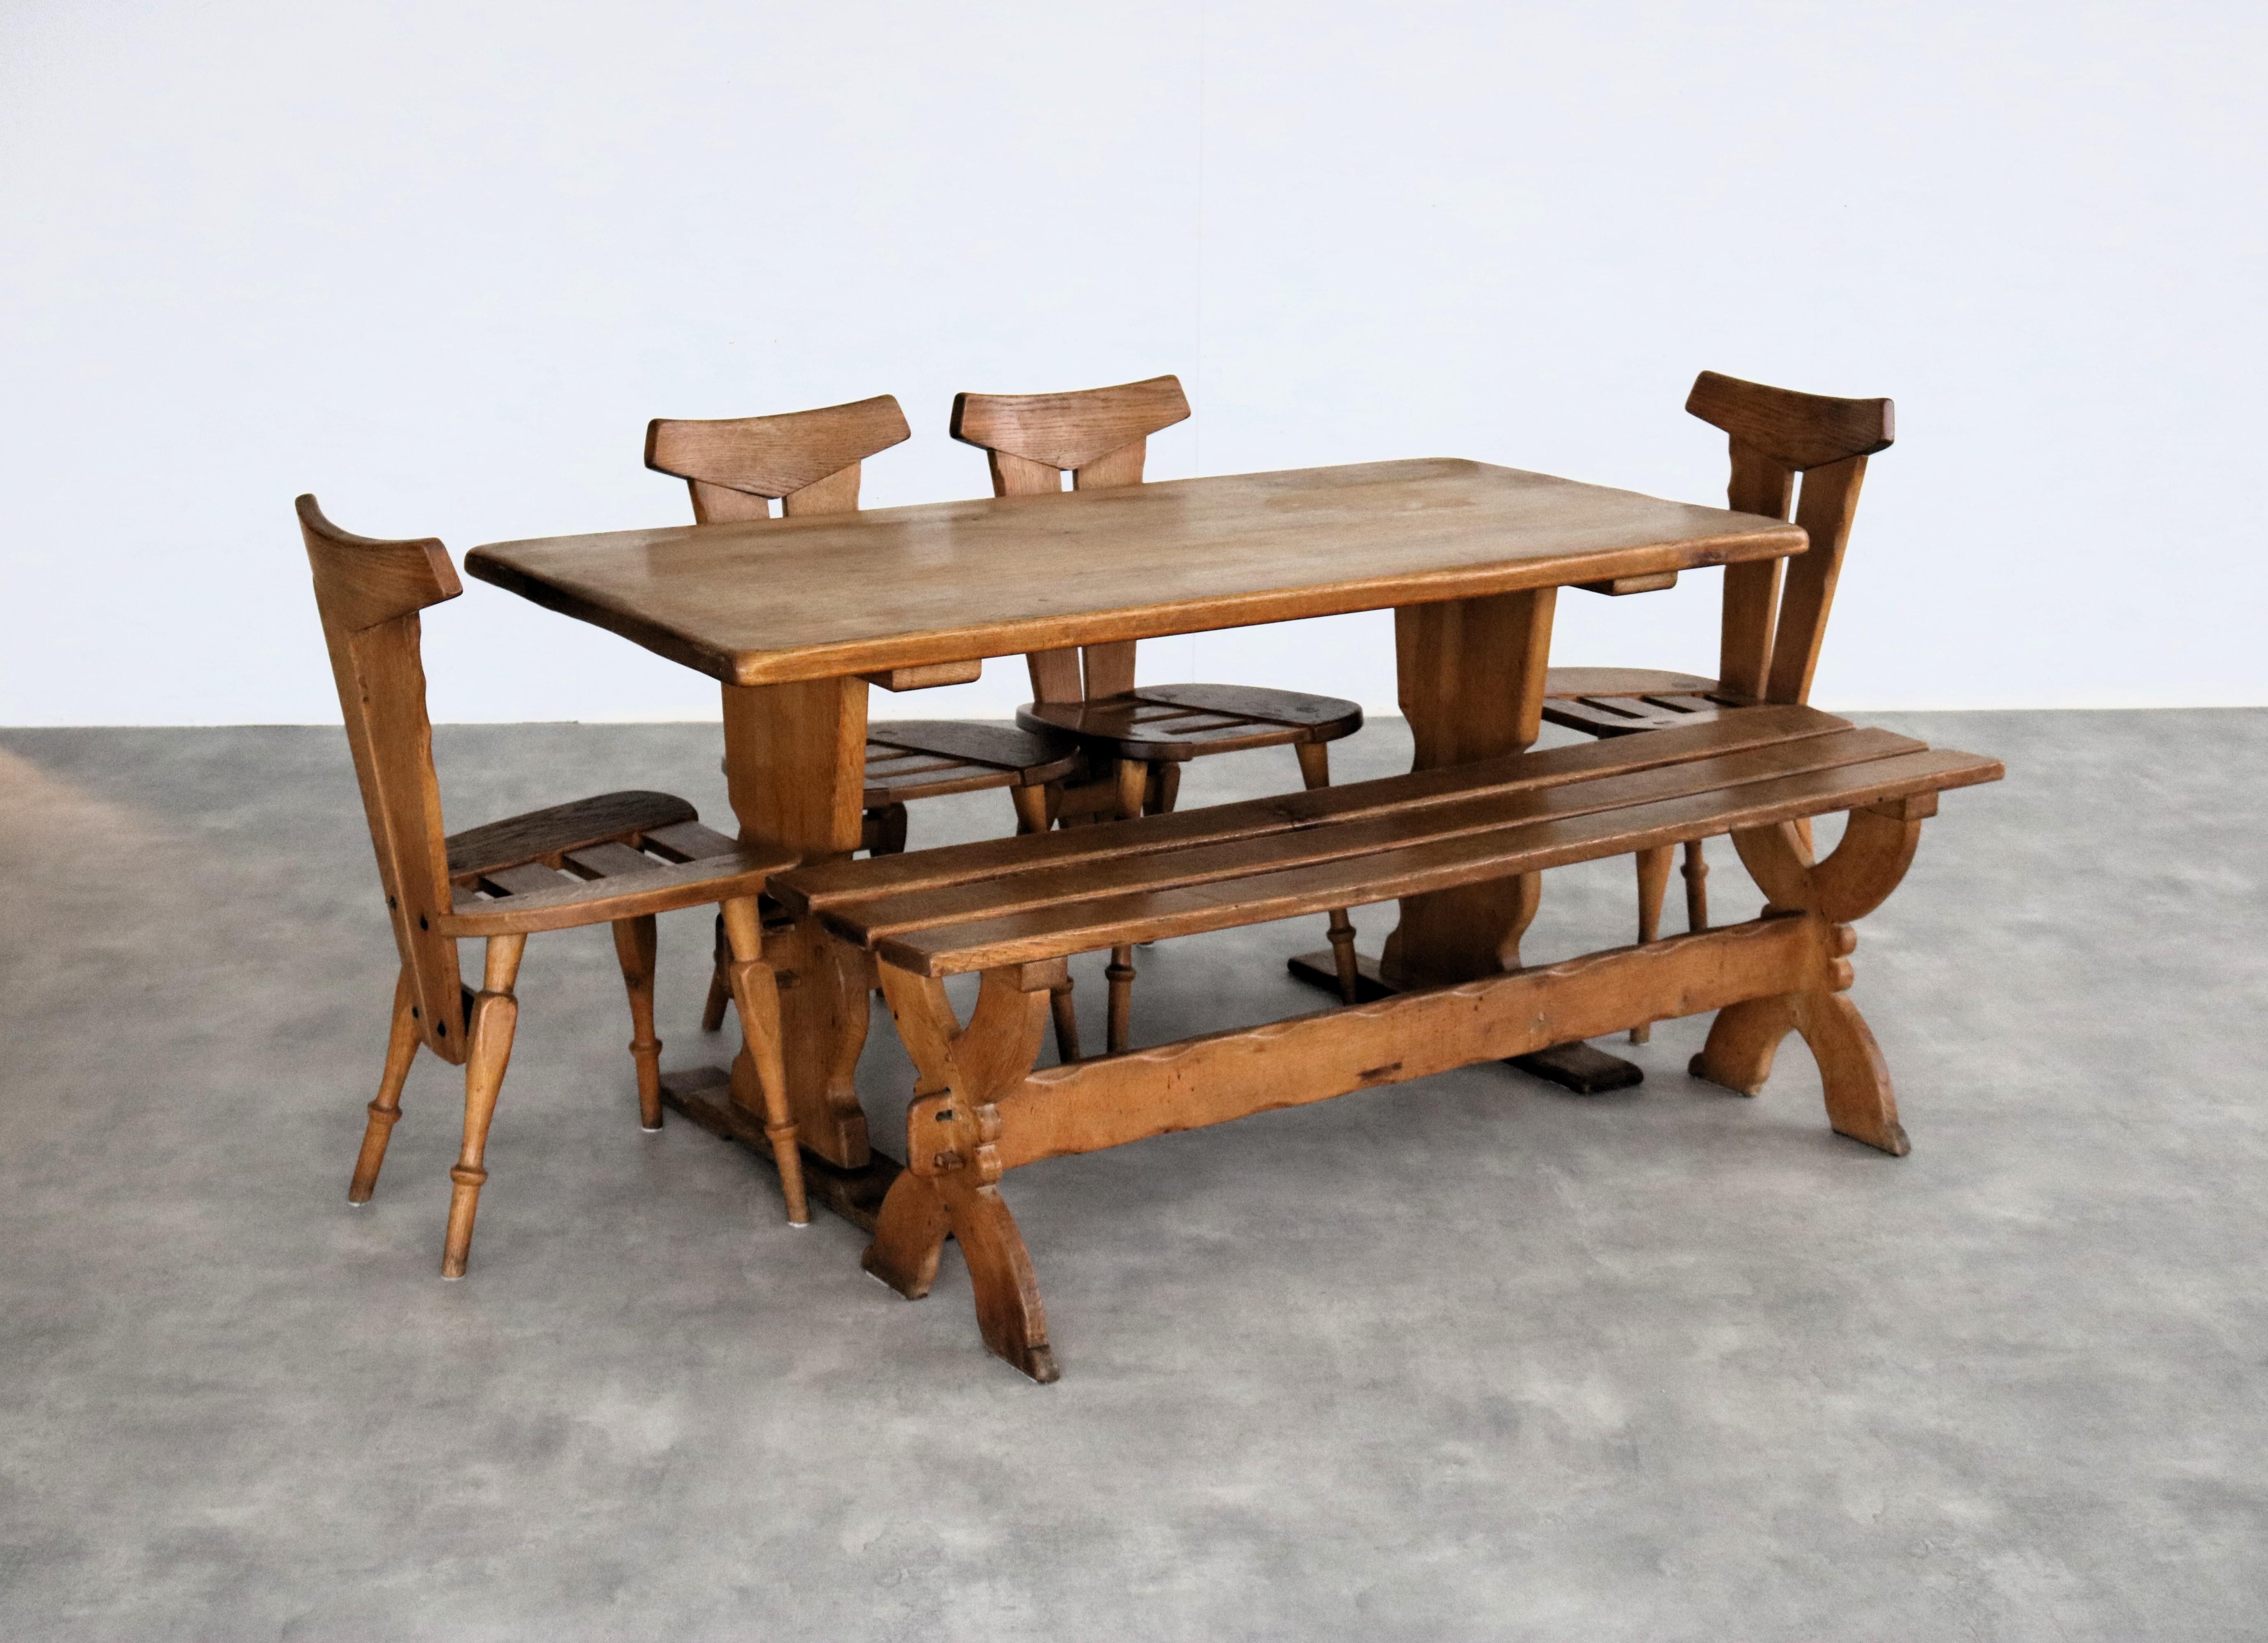 Brutalist dining room set  dining table  chairs  1940s

Complete brutalist dining room set consisting of a dining table with 4 chairs and a bench.

period  1940s
design  unknown  Sweden
condition  good  light signs of use

size table  75 x 160 x 77